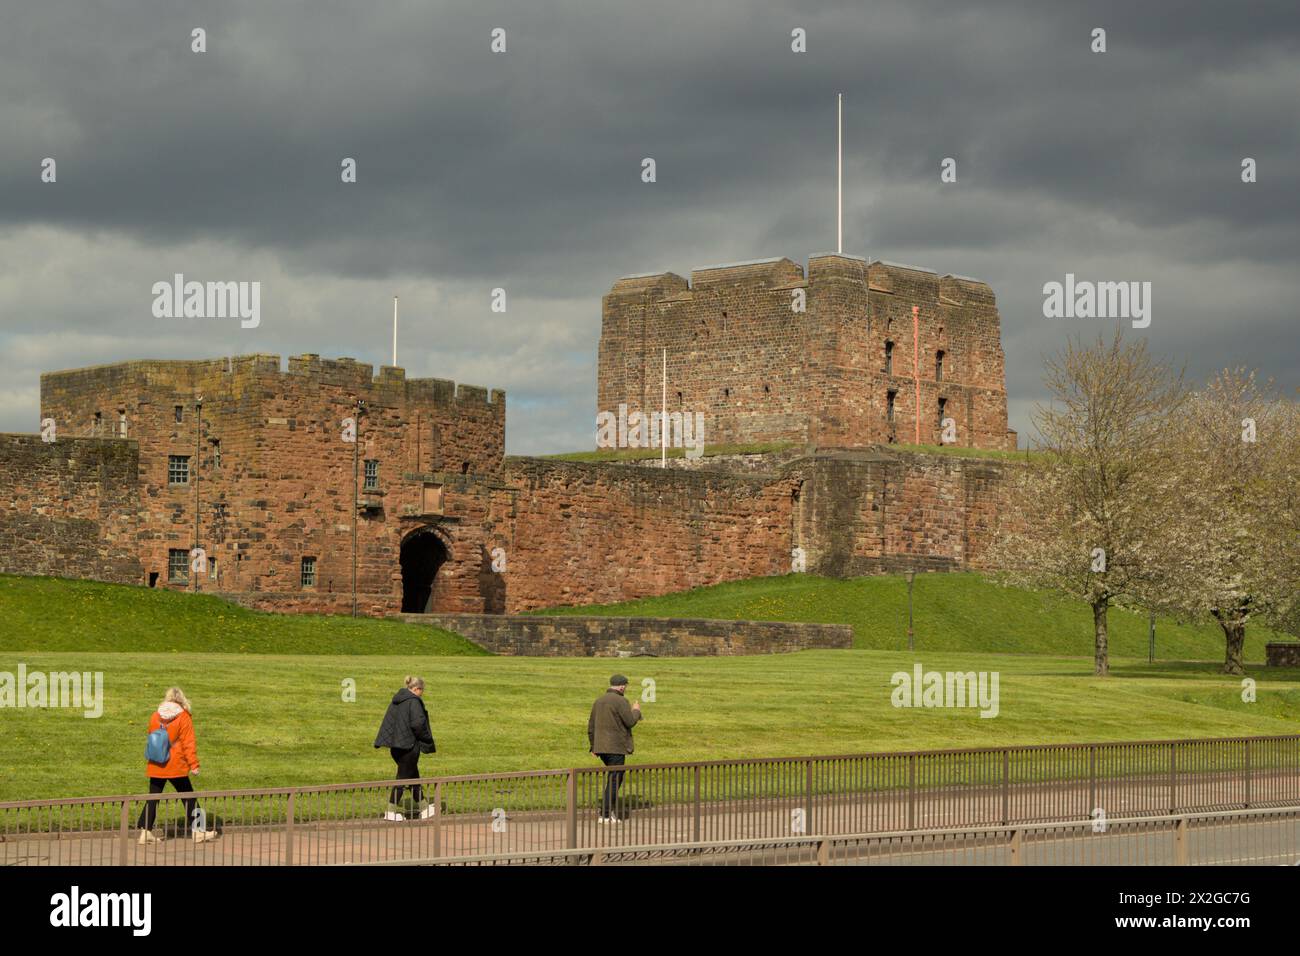 Carlisle Medieval Castle and fortress on a bright spring day with people walking past. Carlisle, Cumbria, UK Stock Photo